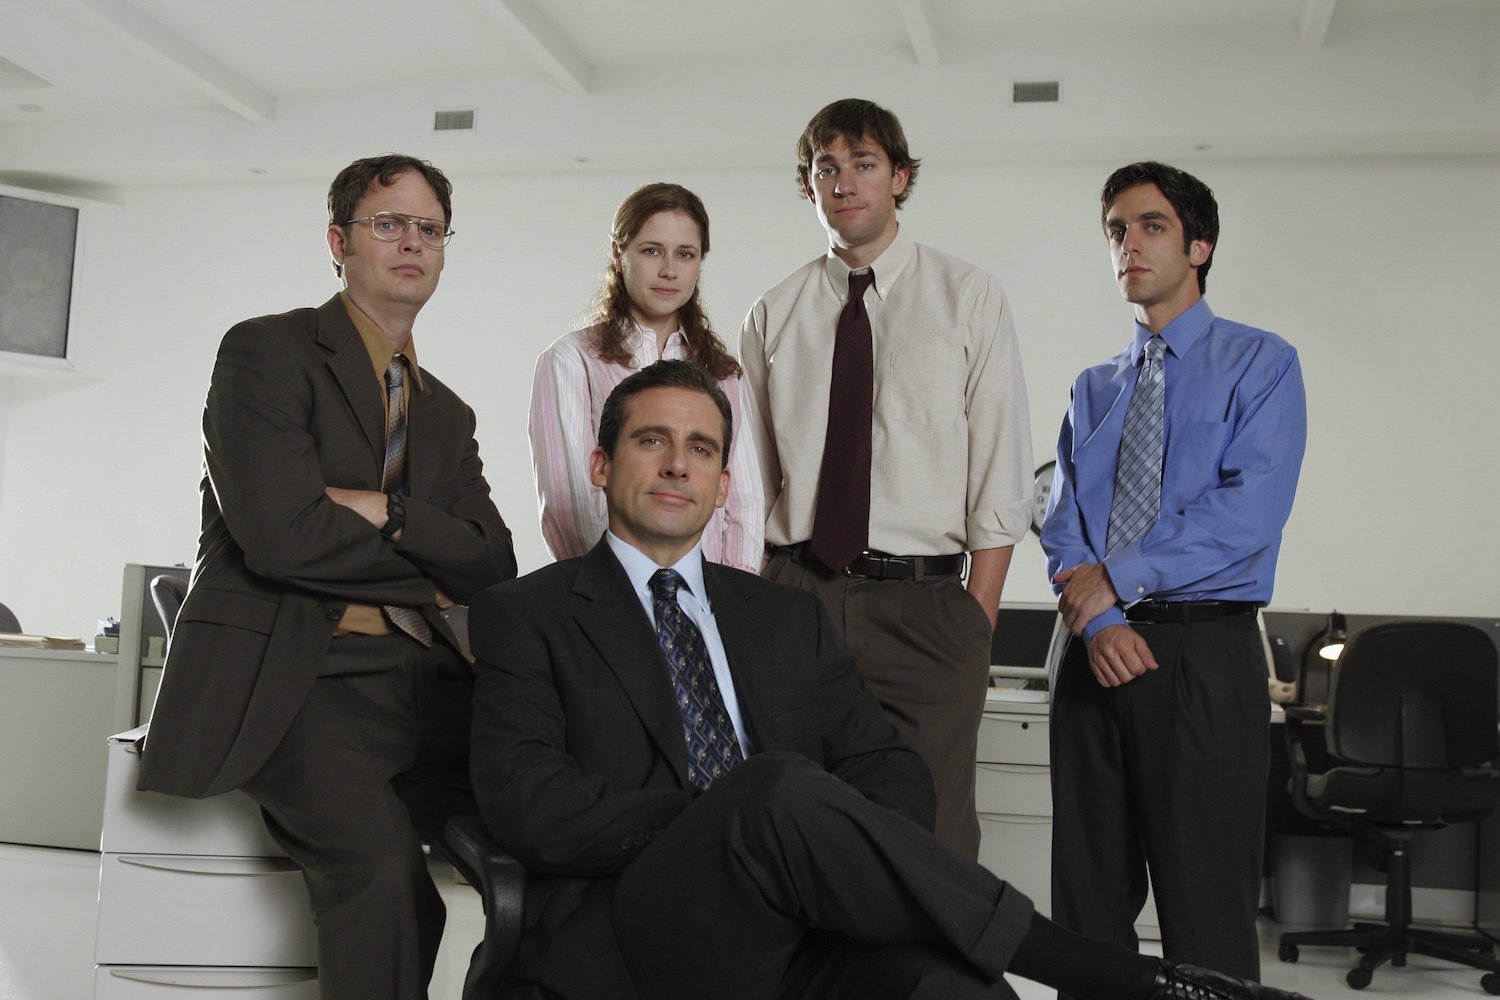 the-office-jenna-fischer-reveals-interesting-details-about-the-show-s-iconic-opening-credits